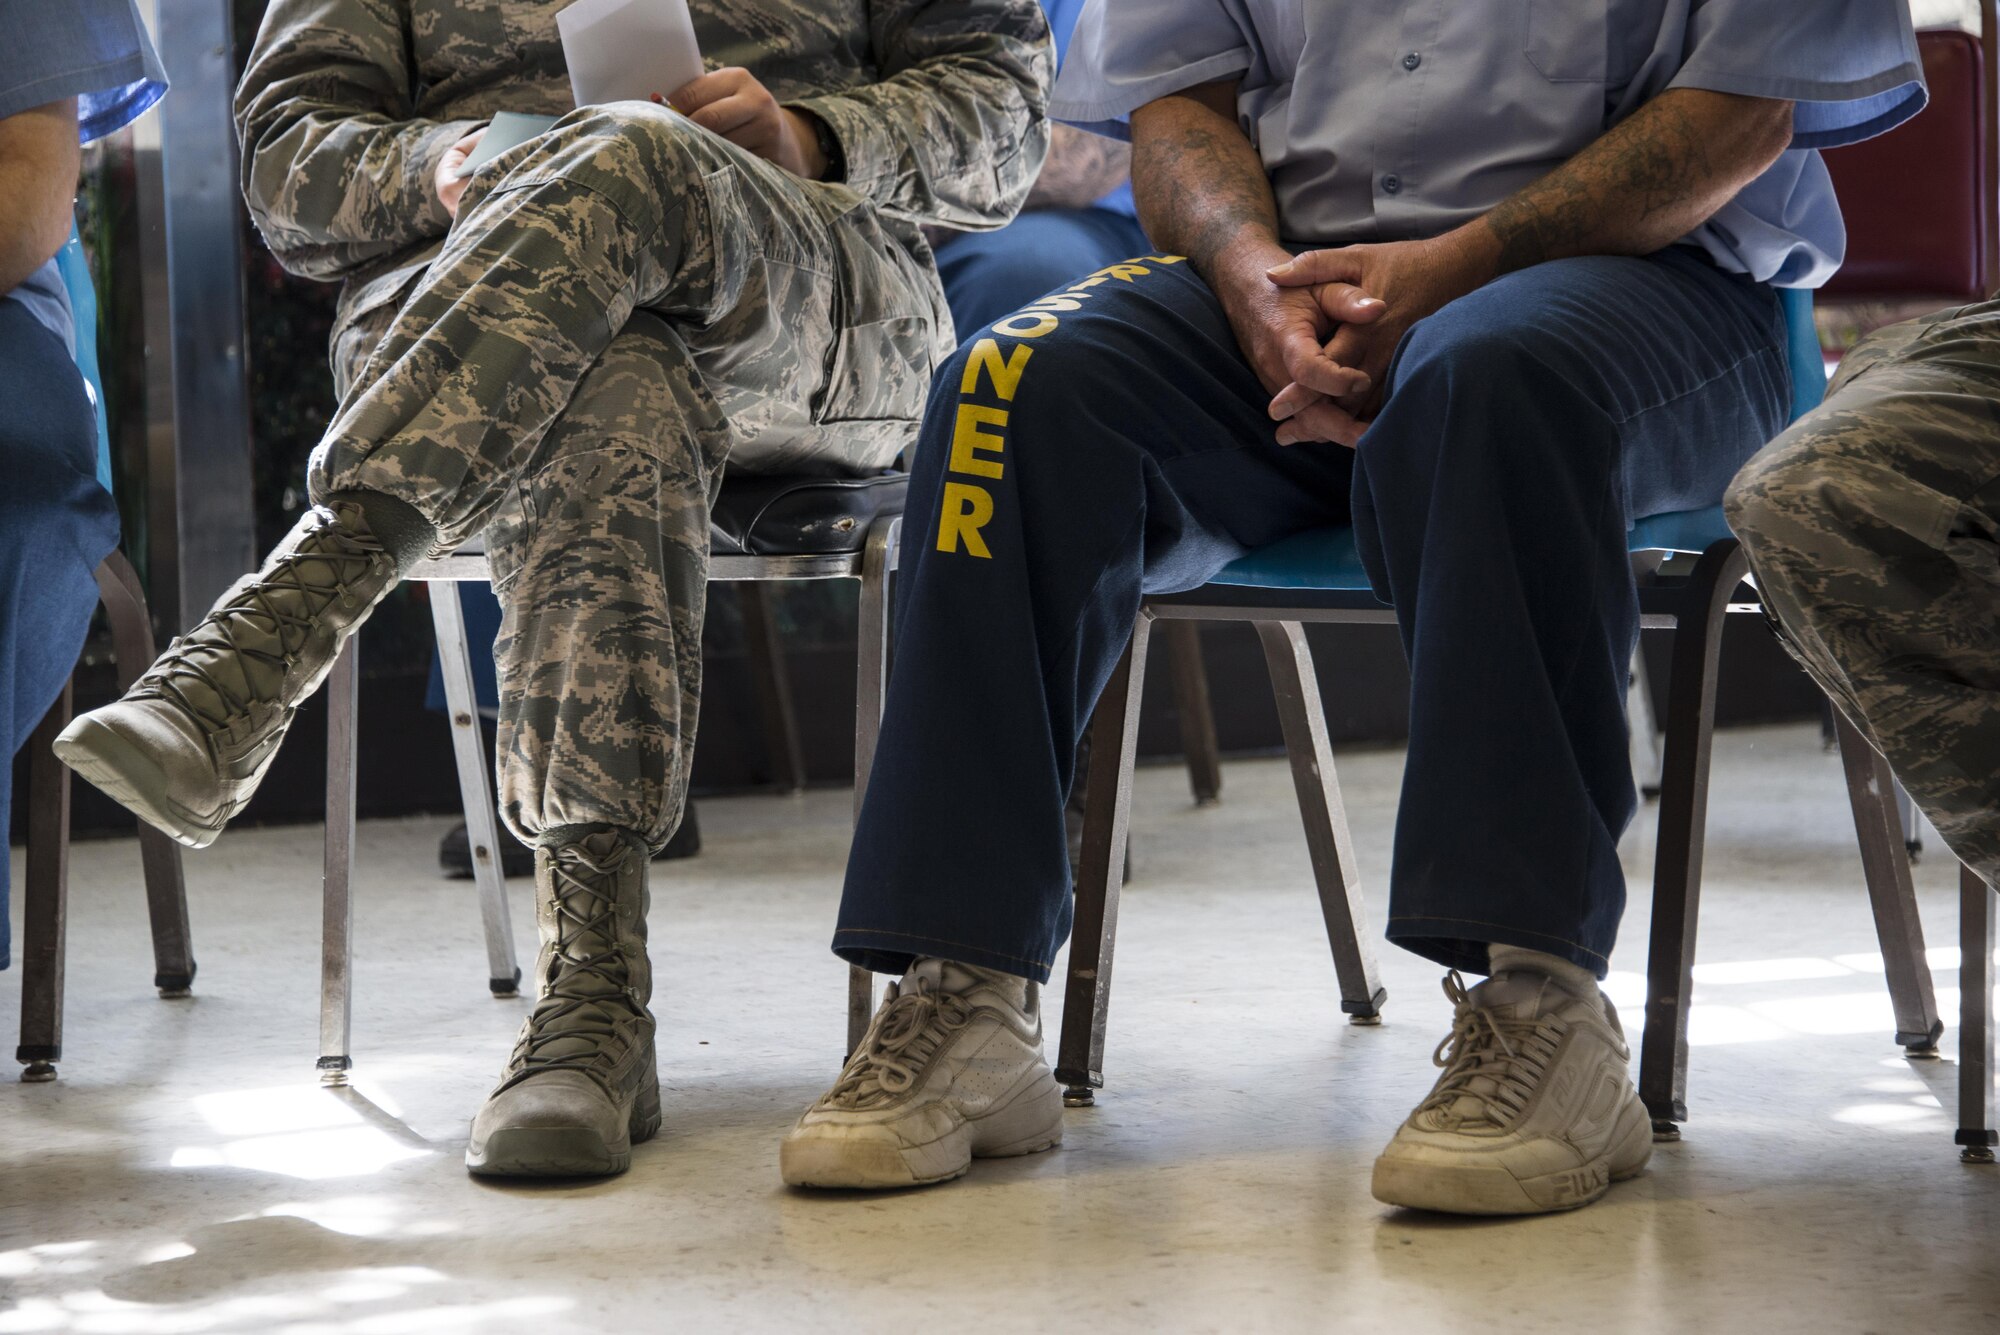 An Airman and inmate sit next to each other and listen to presentations being given by other inmates during the True North program at the California Medical Facility, in Vacaville, Calif., Sept. 15, 2016. As part of the program, Airmen meet with inmates at CMF and hear their personal stories as well as tour the facility. (U.S. Air Force photo by Staff Sgt. Charles Rivezzo) 